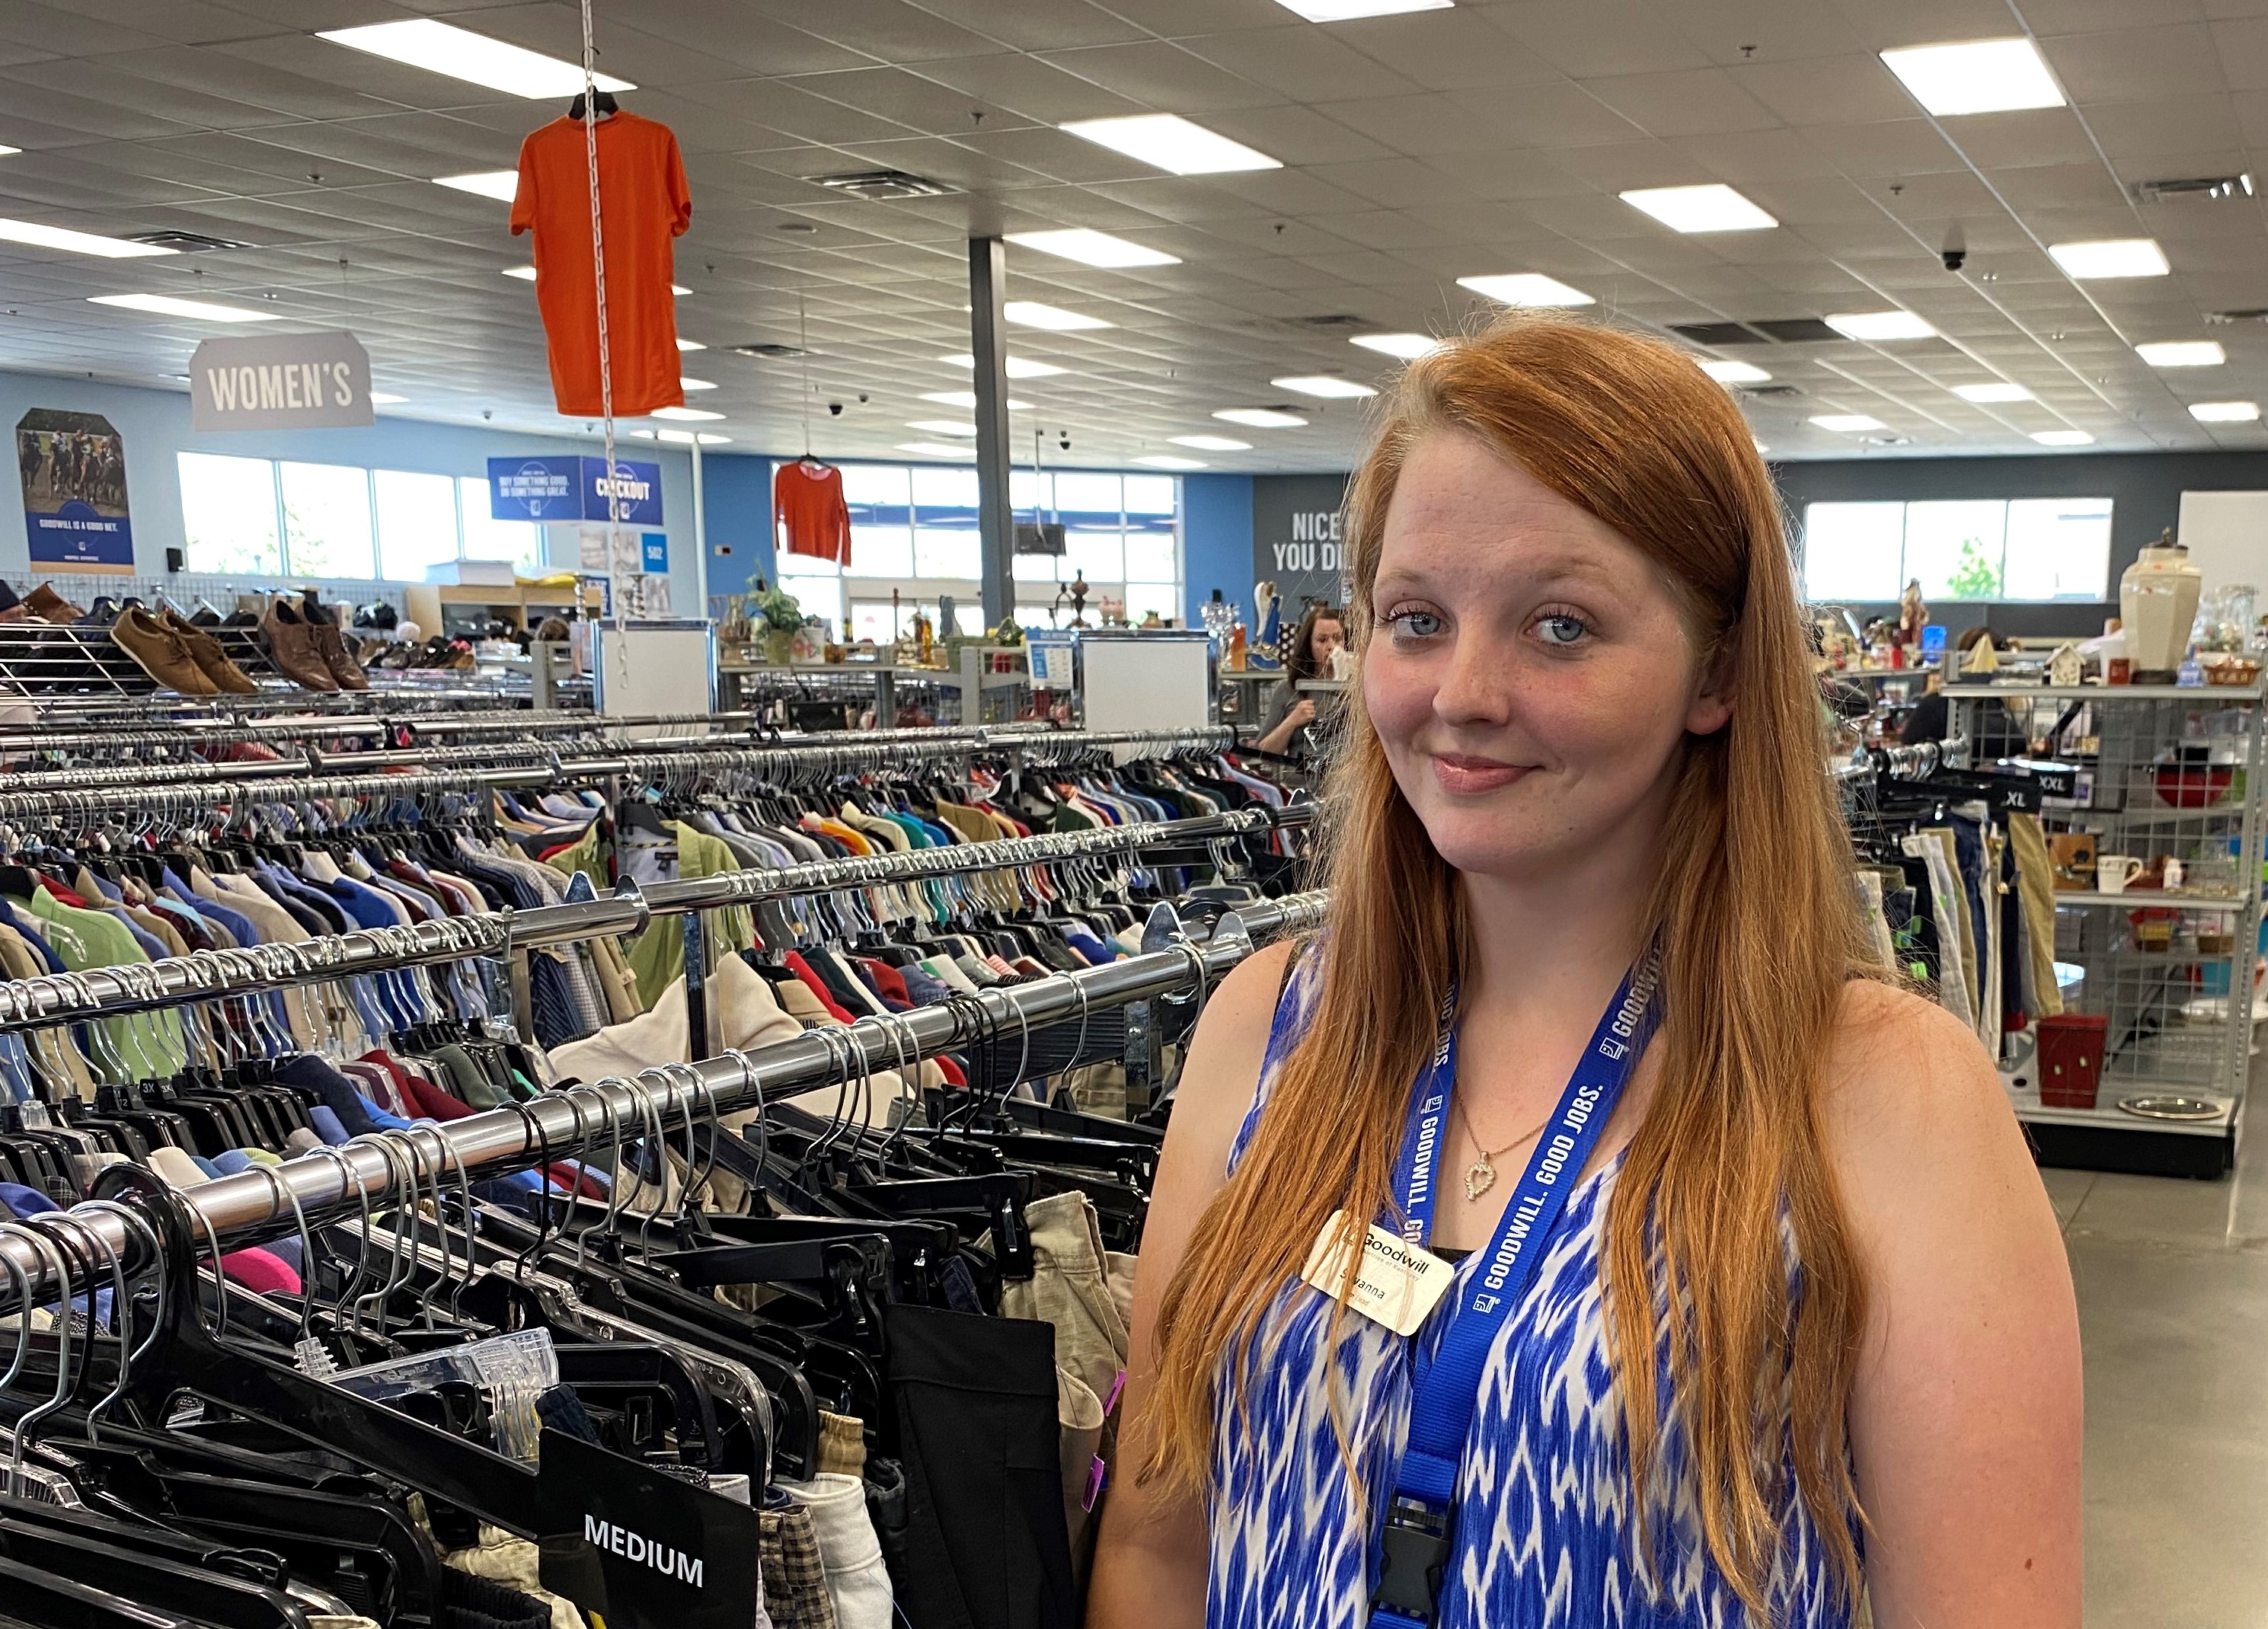 How Ross Stores Is so Successful